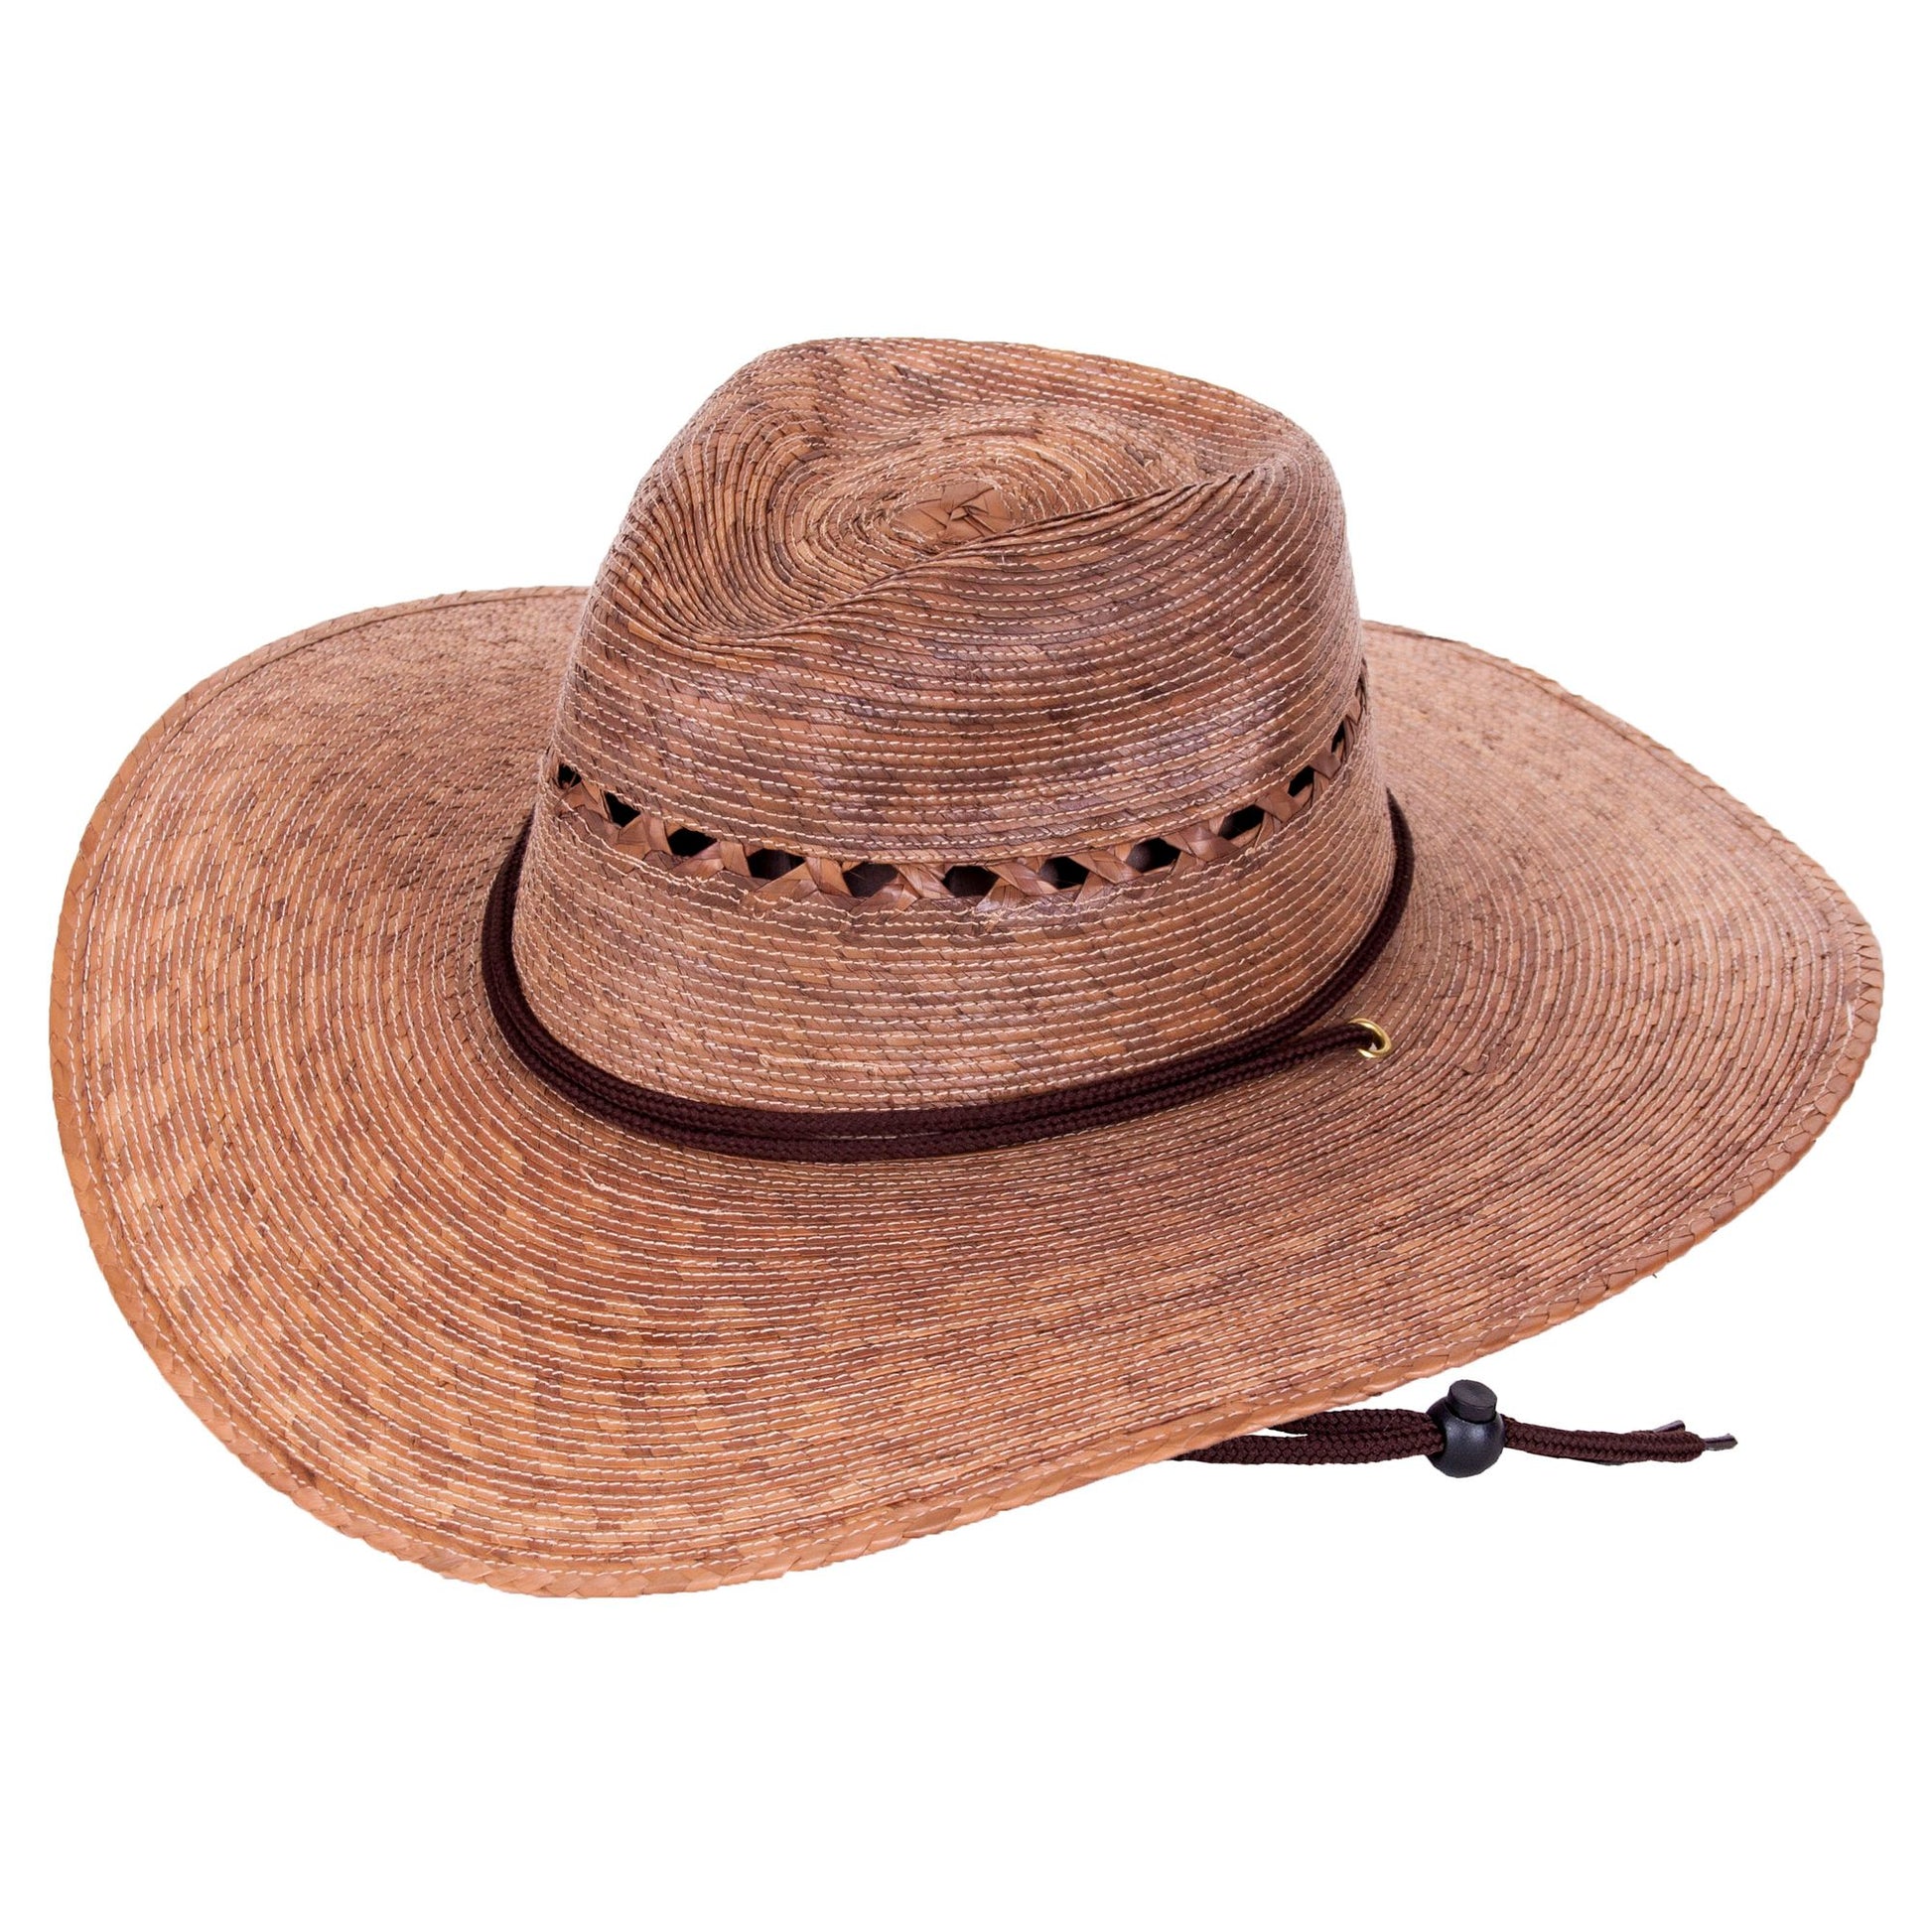 A wide-brimmed NRS Tula Lattice Gardener Hat, constructed from lightweight palm material, isolated on a white background.